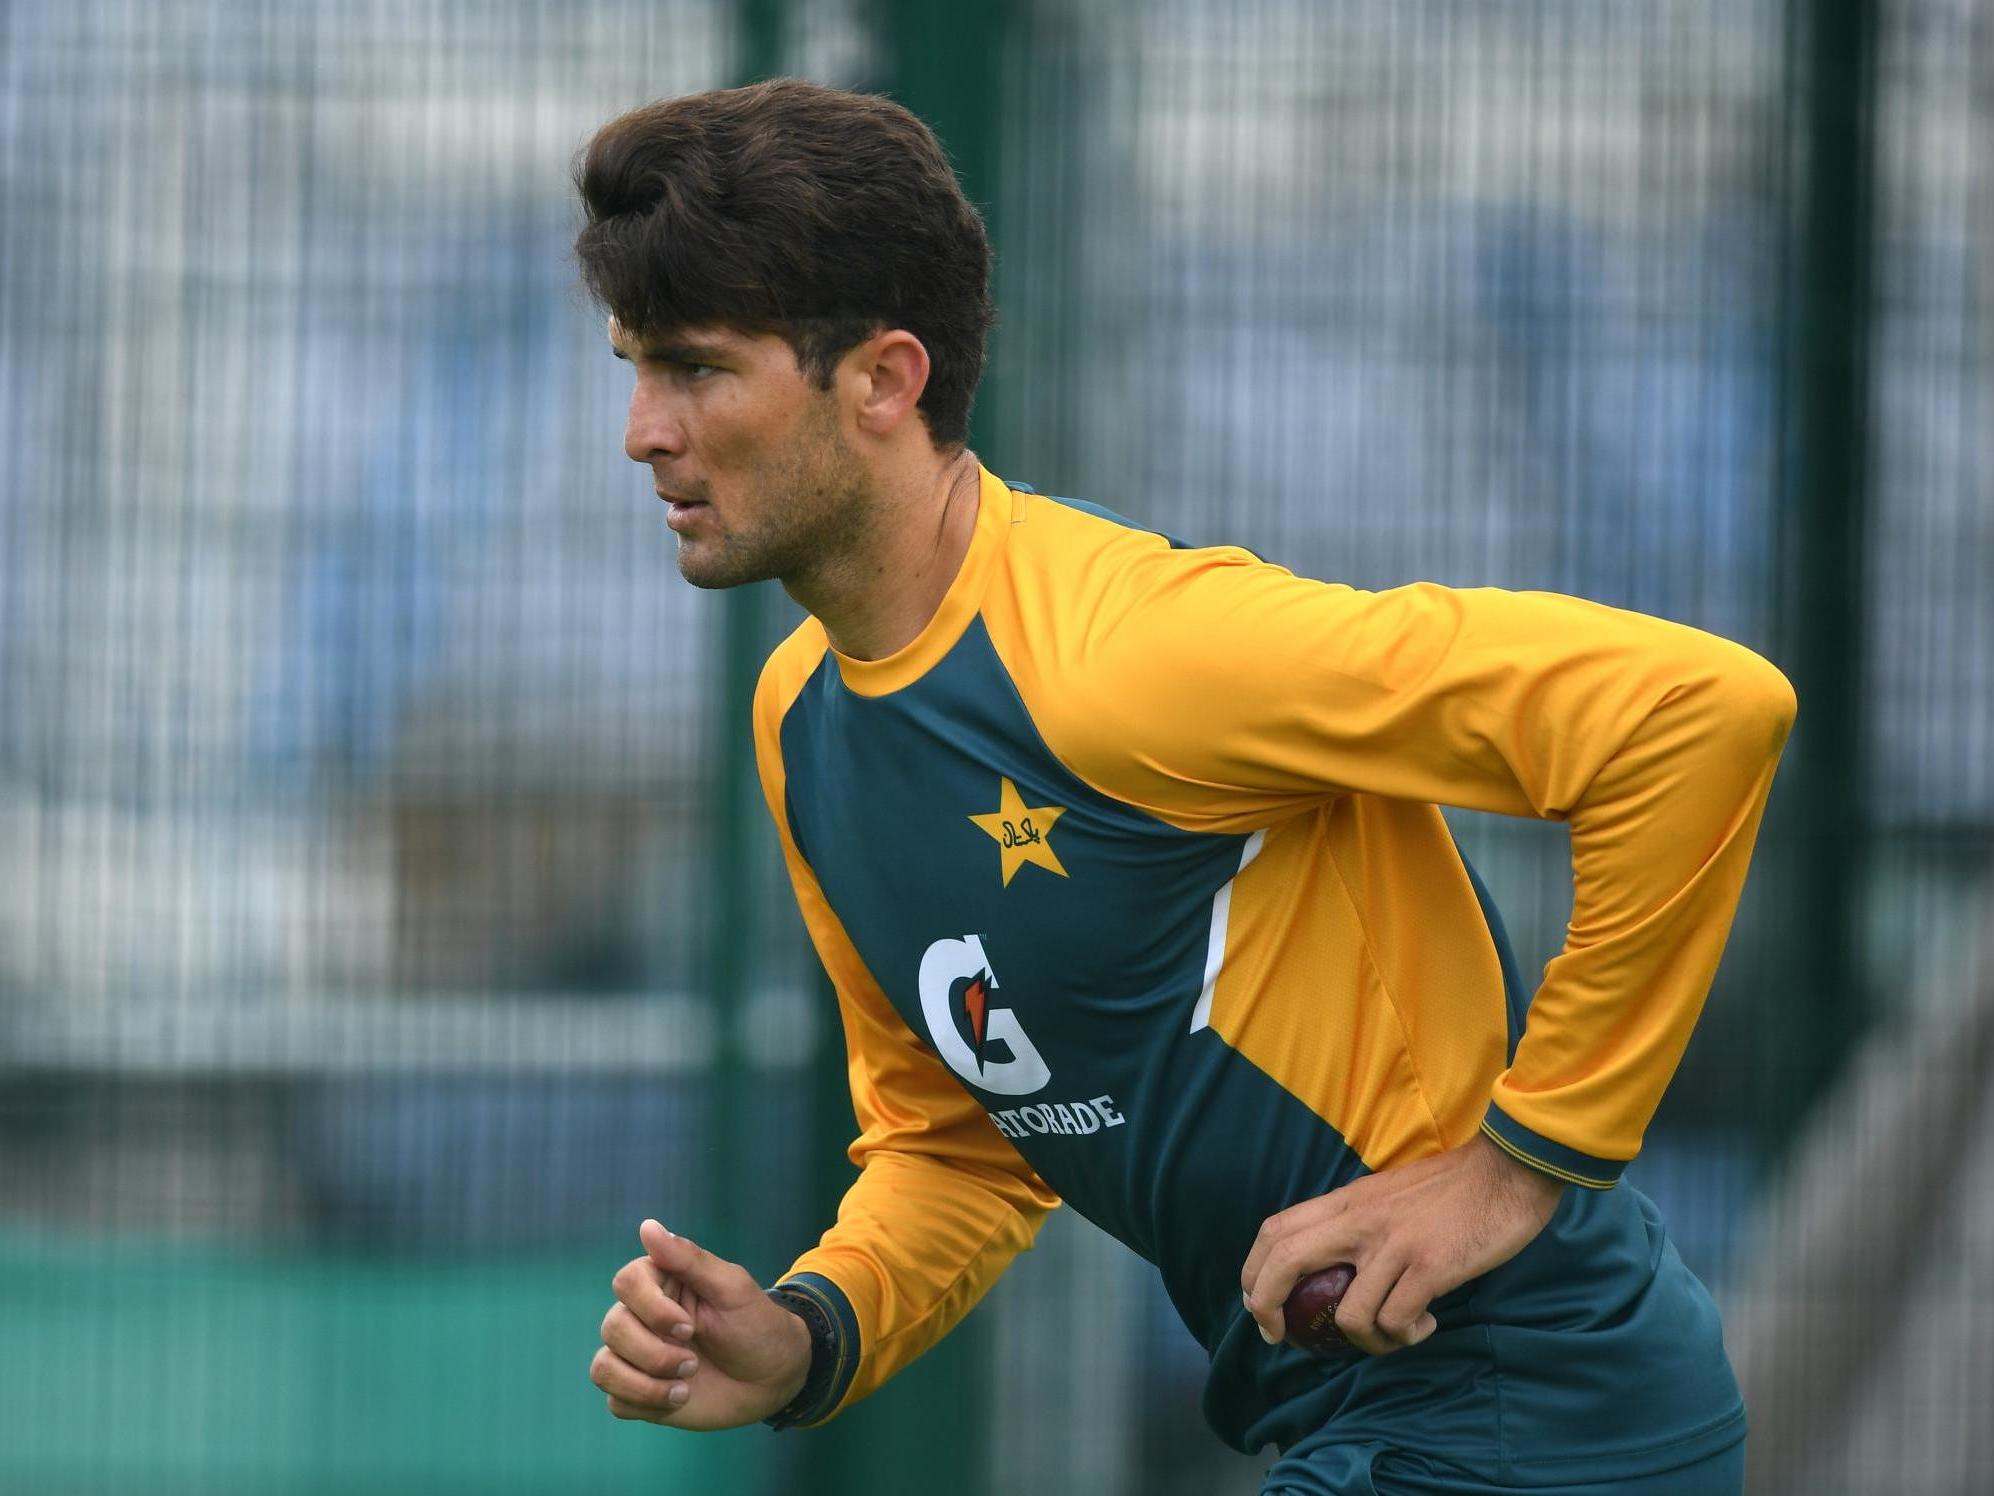 Shaheen Afridi leads Pakistan's pace attack against England